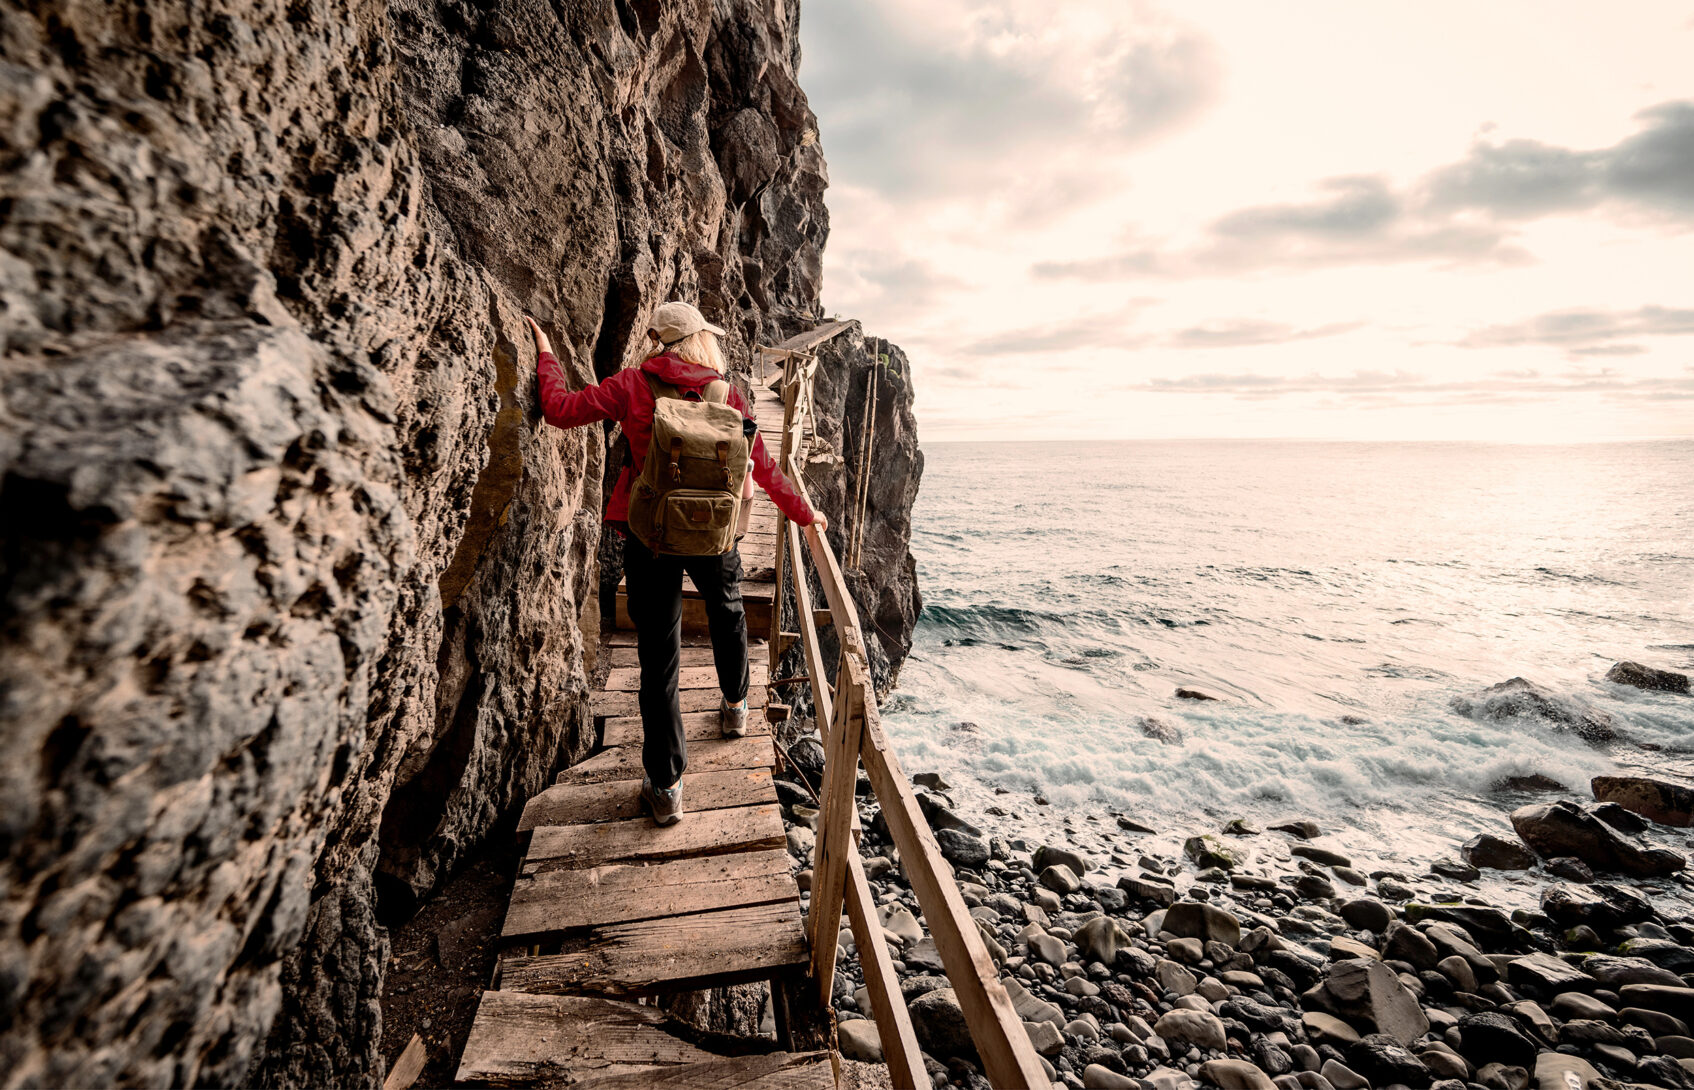 A woman uses a handrail in climbing a wooden ramp by an ocean cliff.